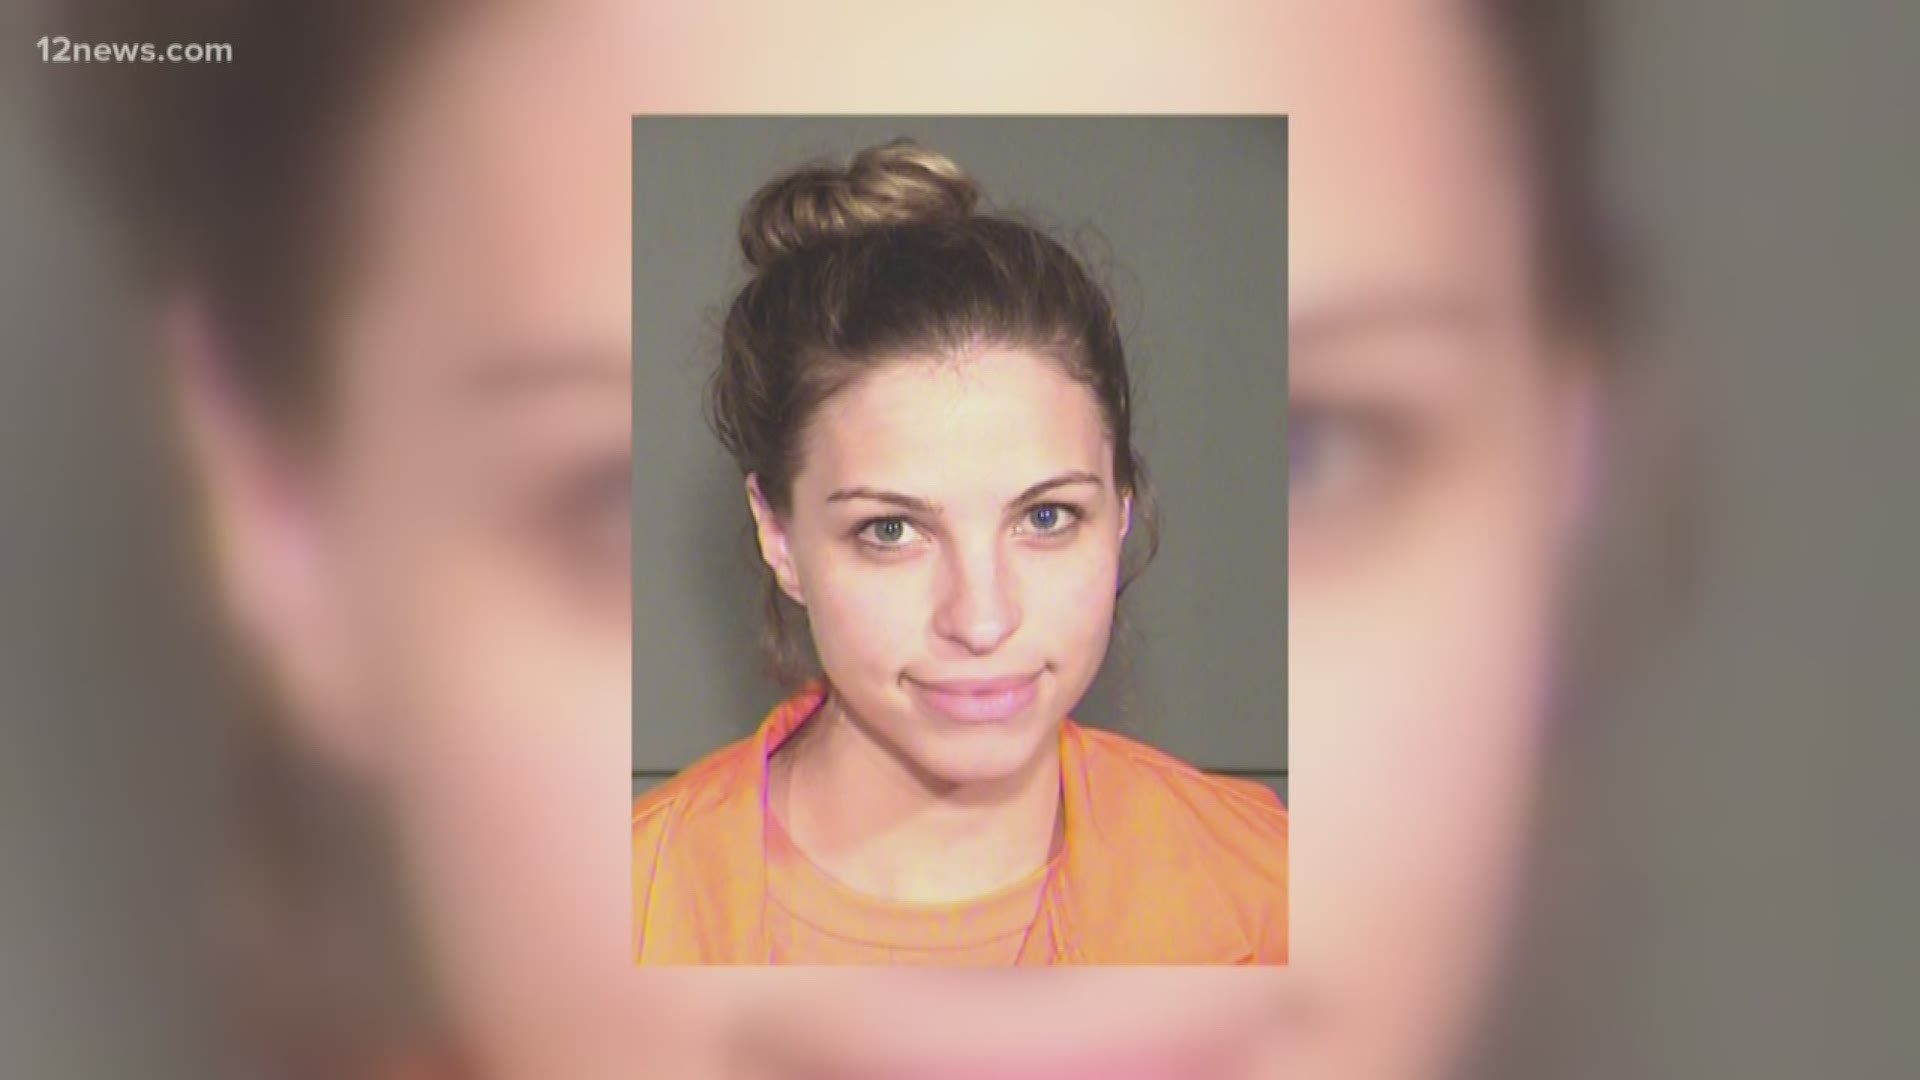 More than a year after Brittany Zamora was arrested for having sexual contact with her 13-year-old student, the former 6th-grade teacher was sentenced to 20 years.